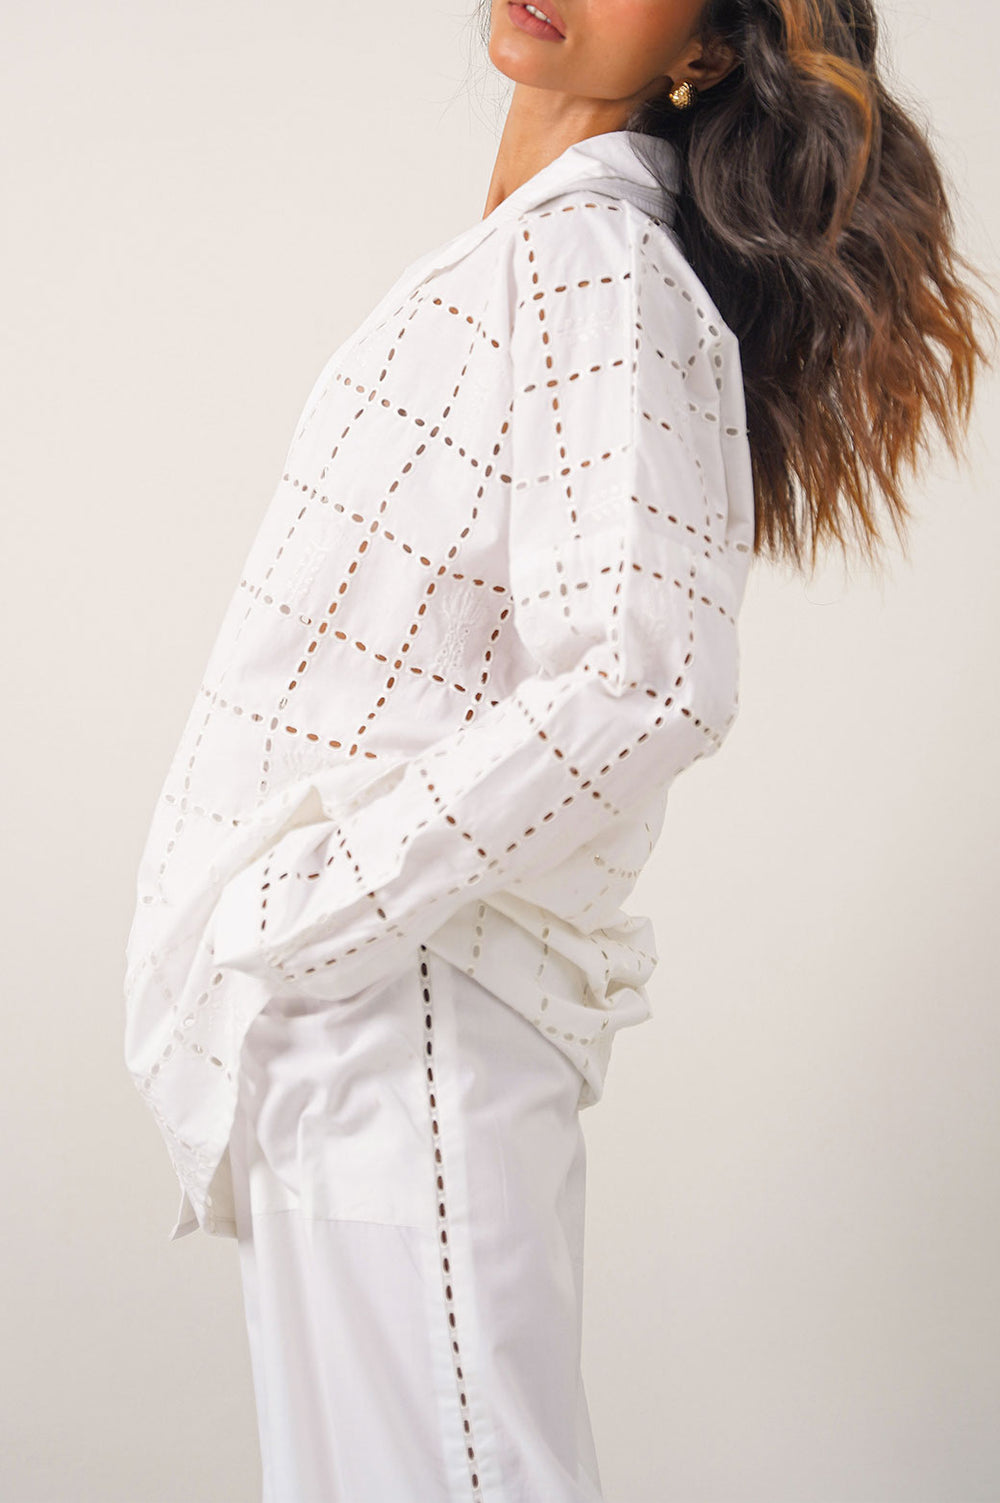 WHITE DOUBLE COLLAR EMBROIDERED SHIRT